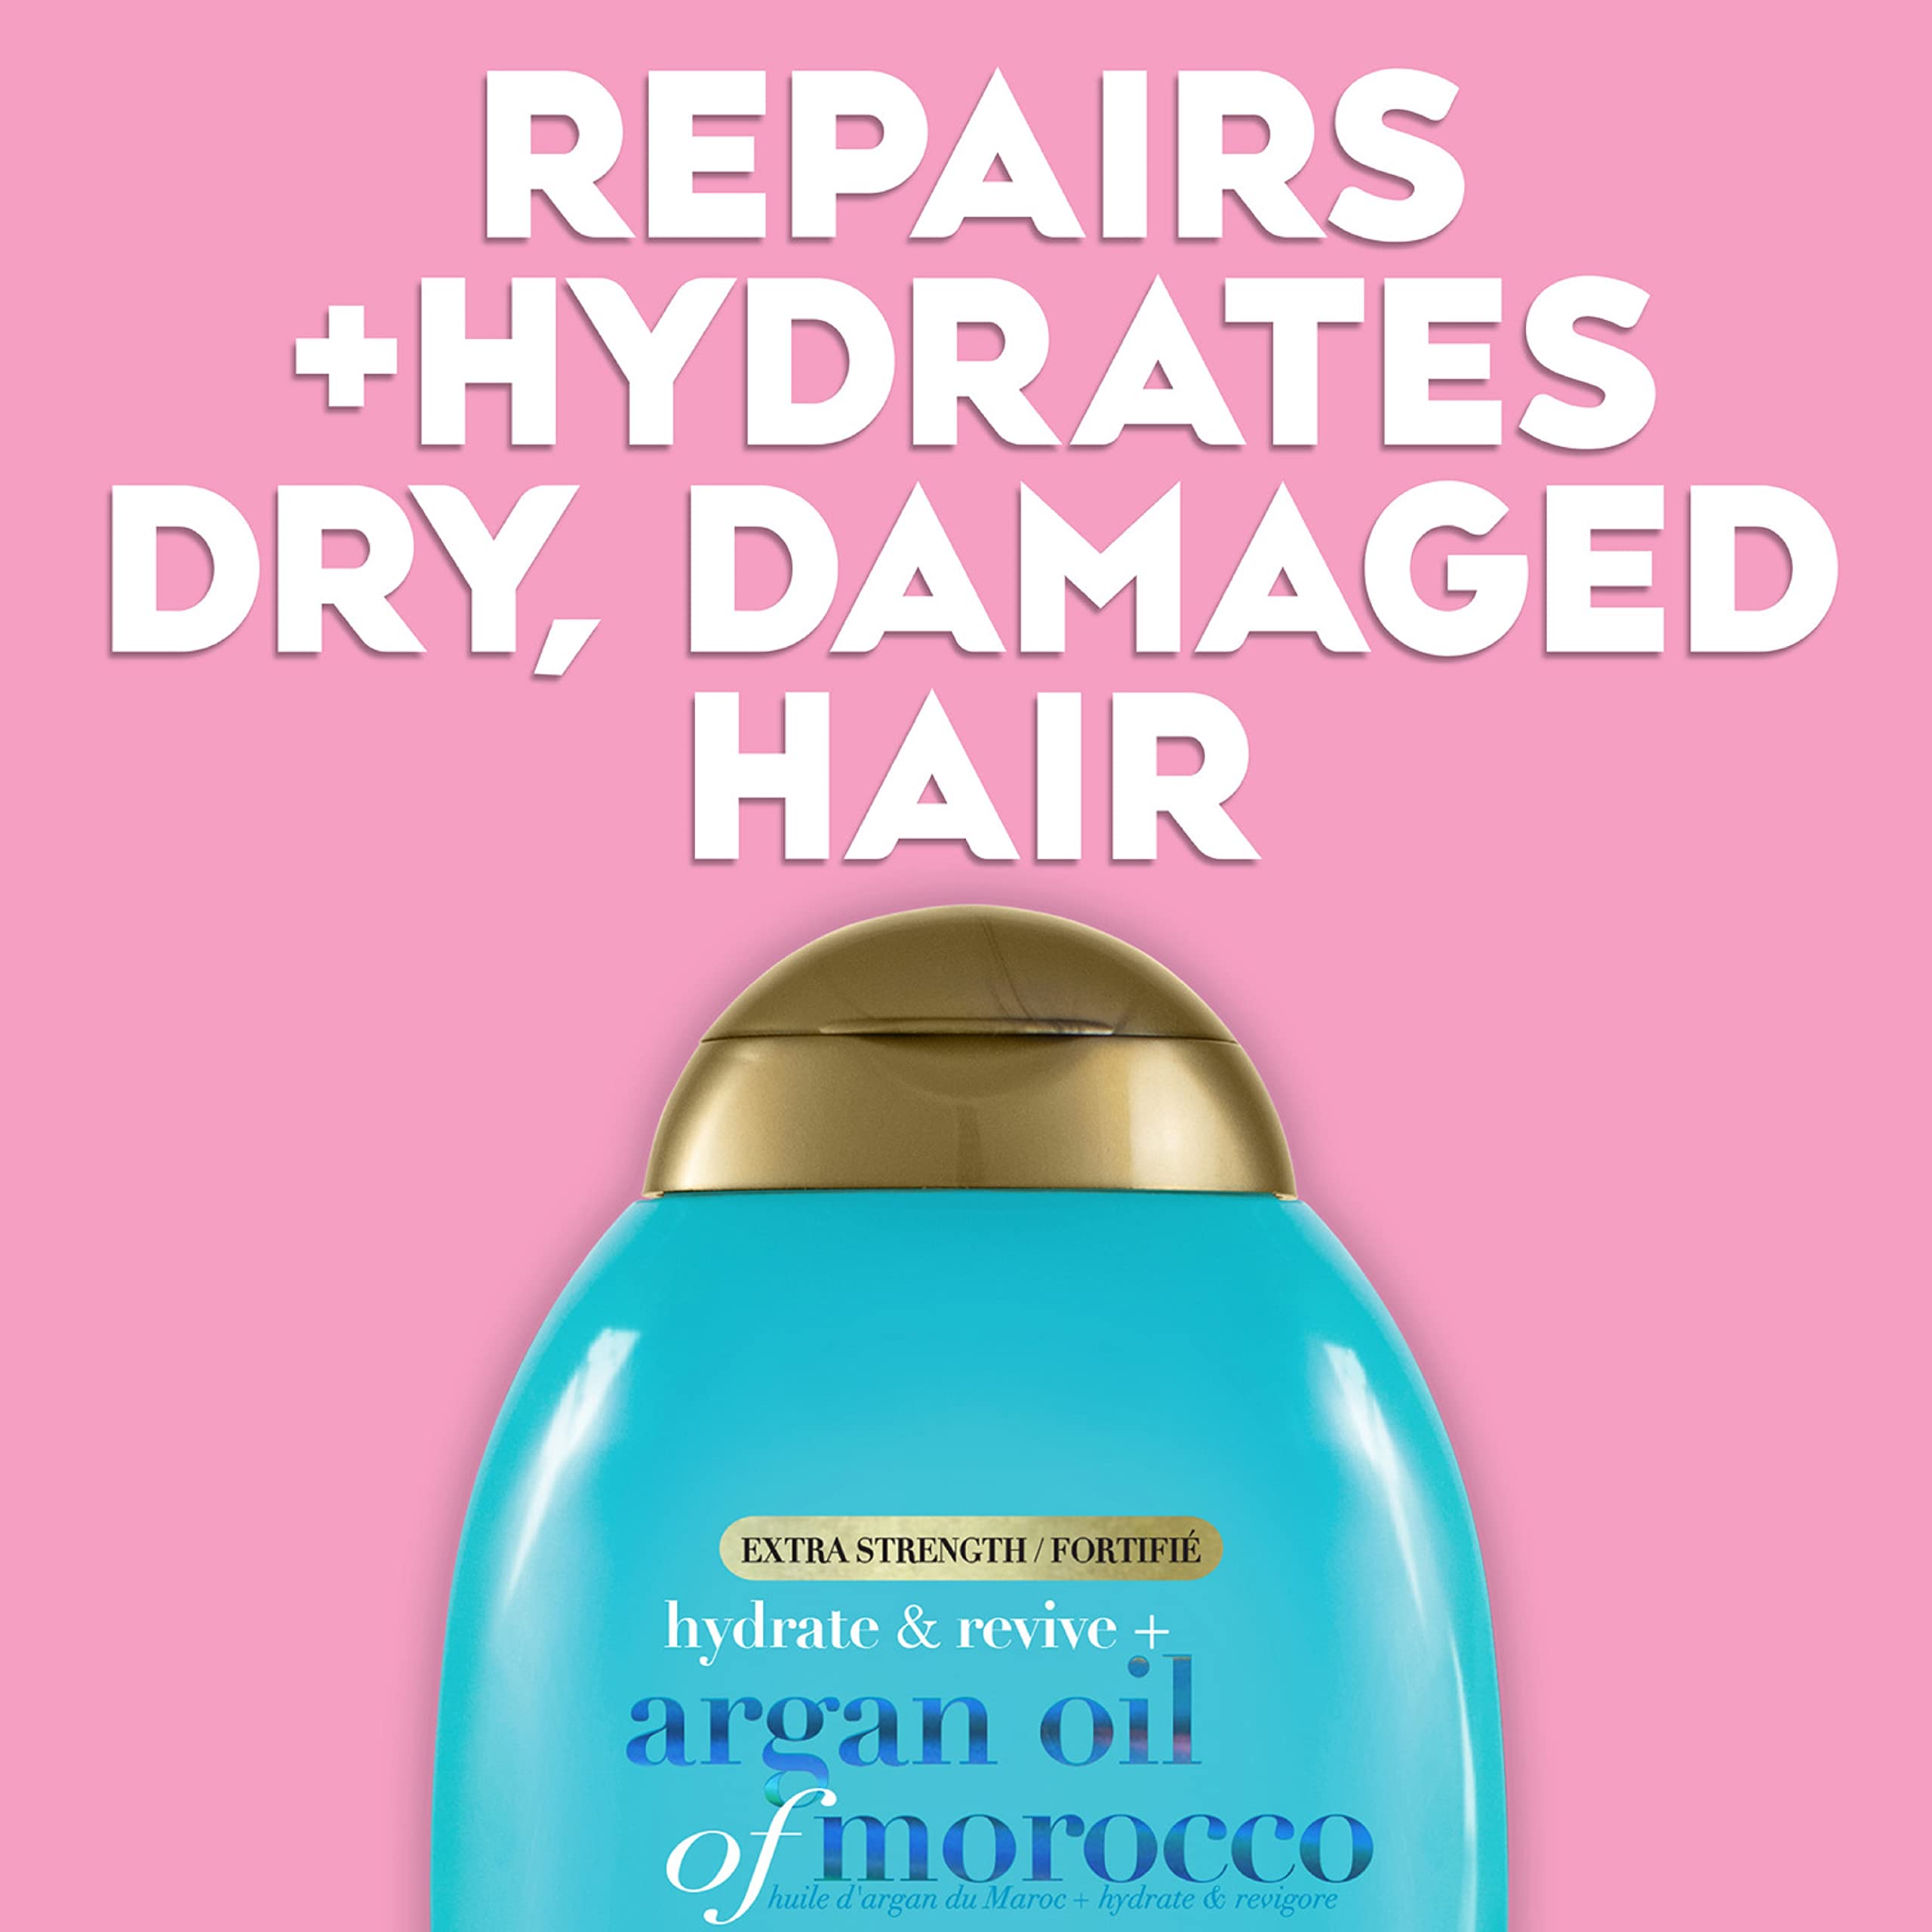 OGX Extra Strength Hydrate & Repair + Argan Oil of Morocco Shampoo for Dry, Damaged Hair, Cold-Pressed Argan Oil to Moisturize & Smooth, Paraben-Free, Sulfate-Free Surfactants, 13 fl oz